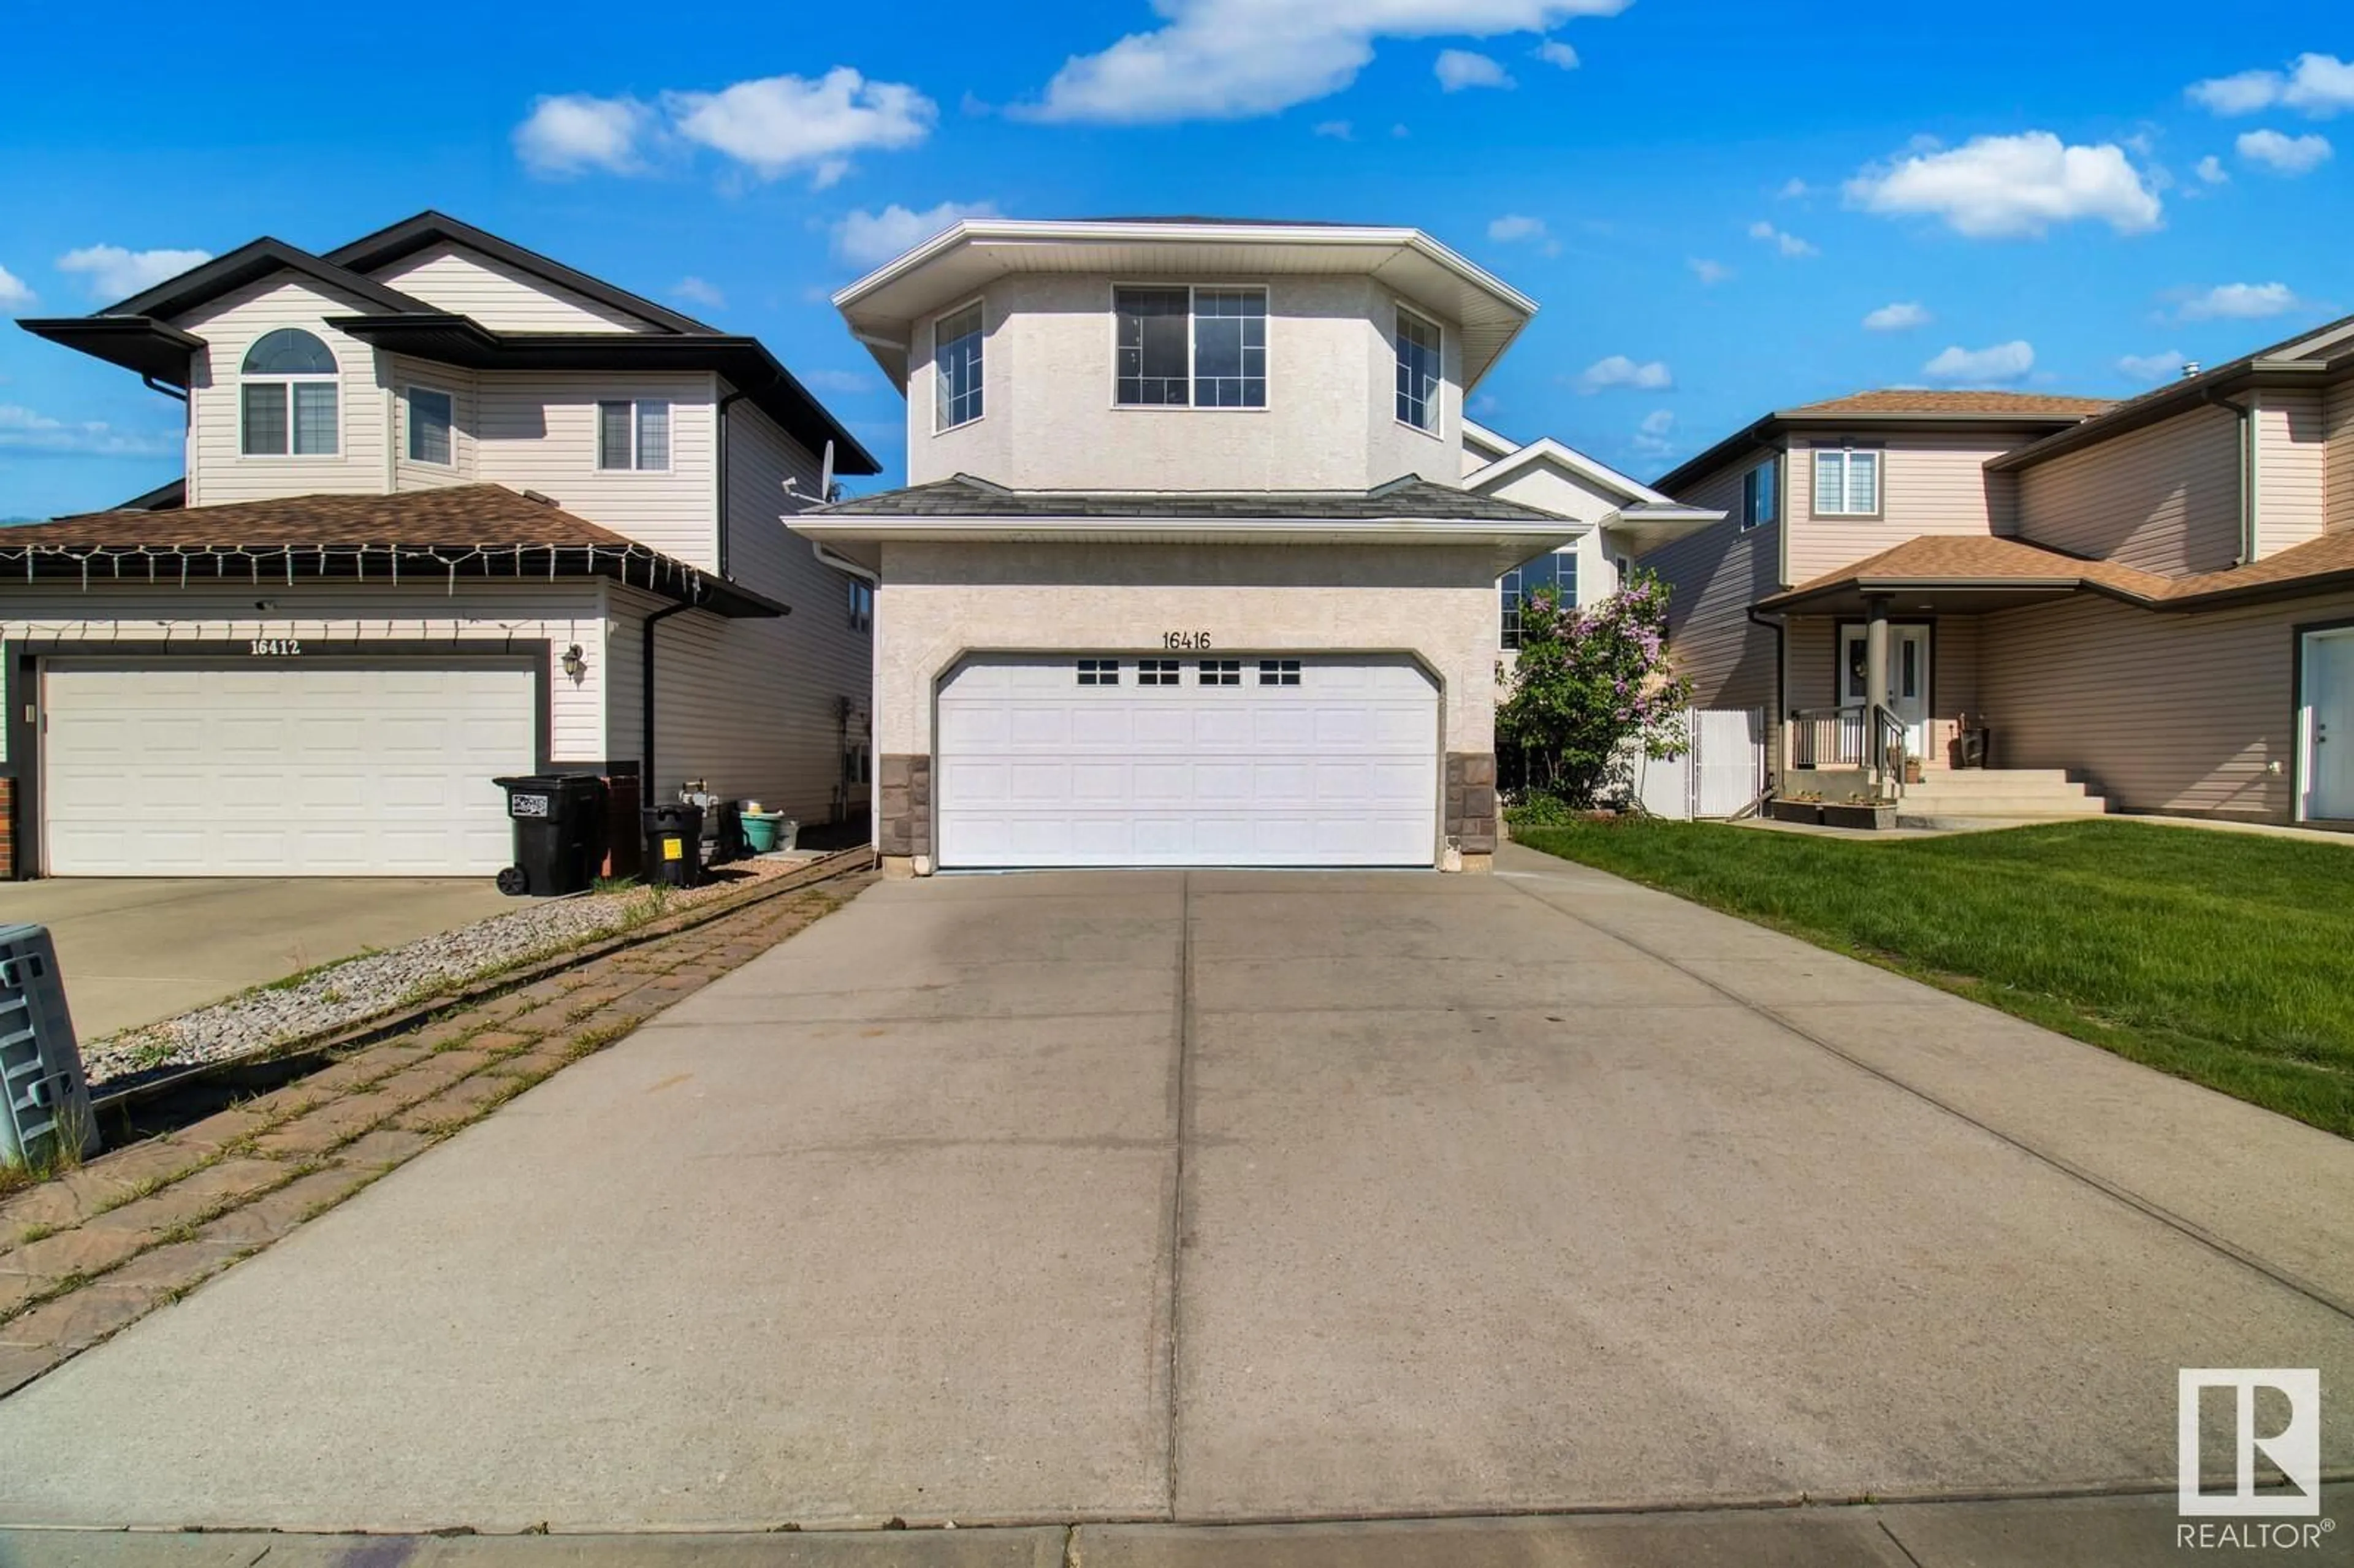 Frontside or backside of a home for 16416 61 ST NW, Edmonton Alberta T6T1W6